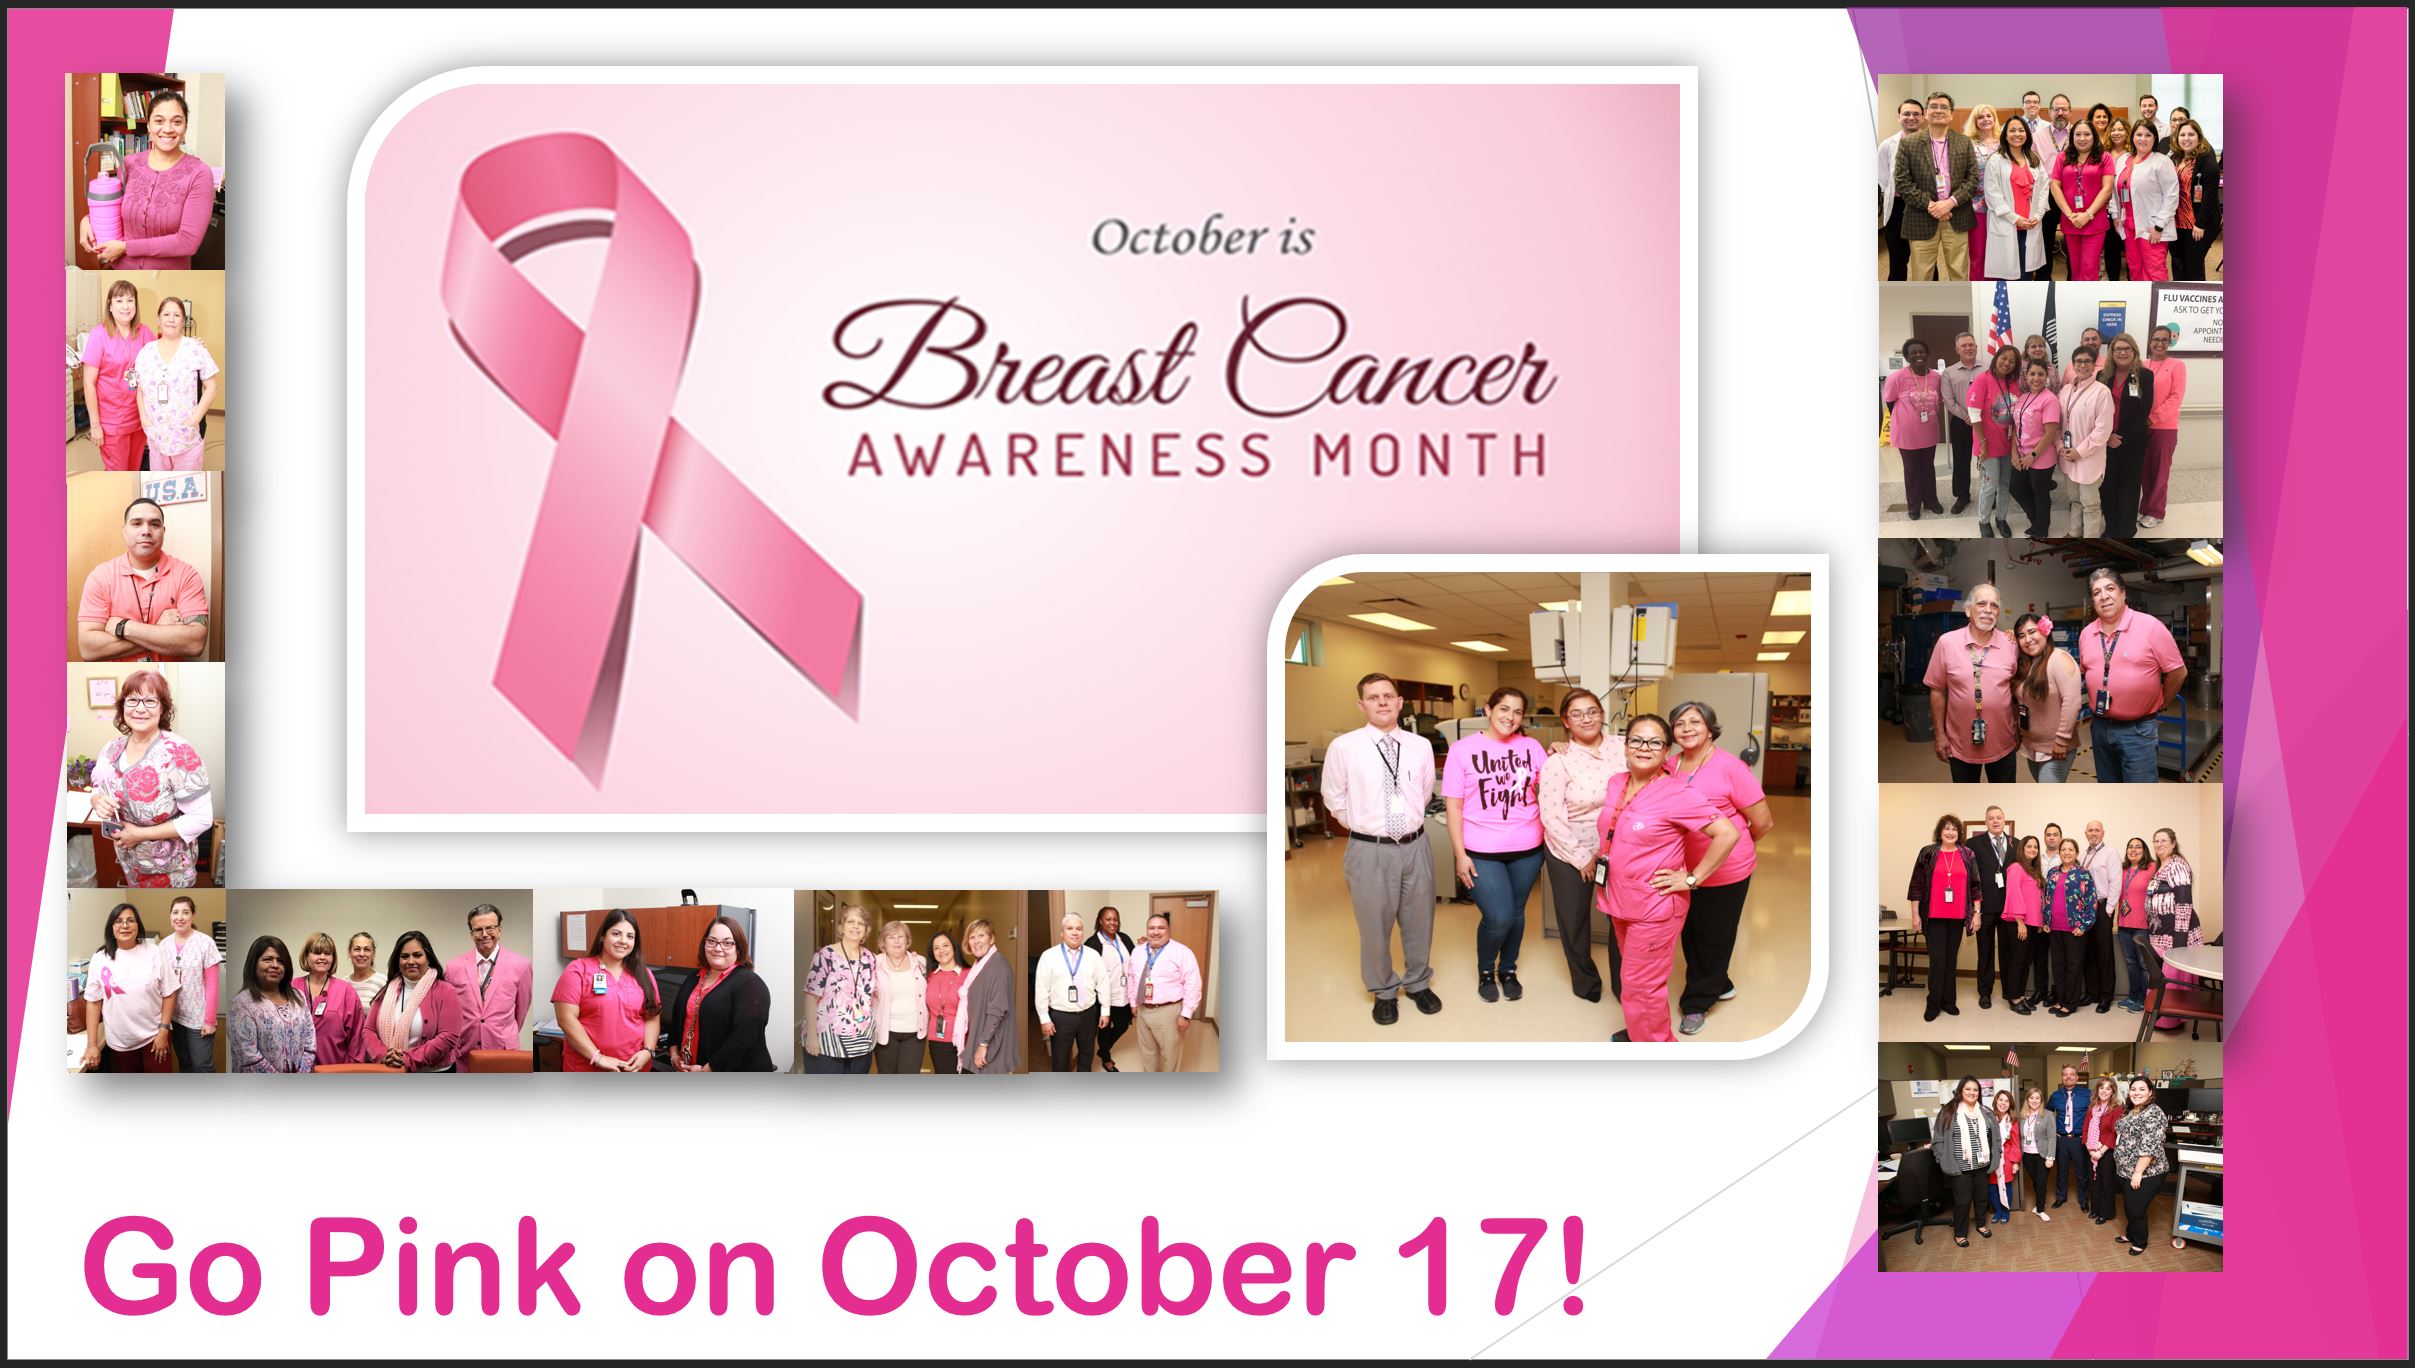 Dozens of employees, interns and volunteers from VA Texas Valley Coastal Bend Health Care System (VCB) wore pink on October 17, 2018, in observance of Breast Cancer Awareness Month.